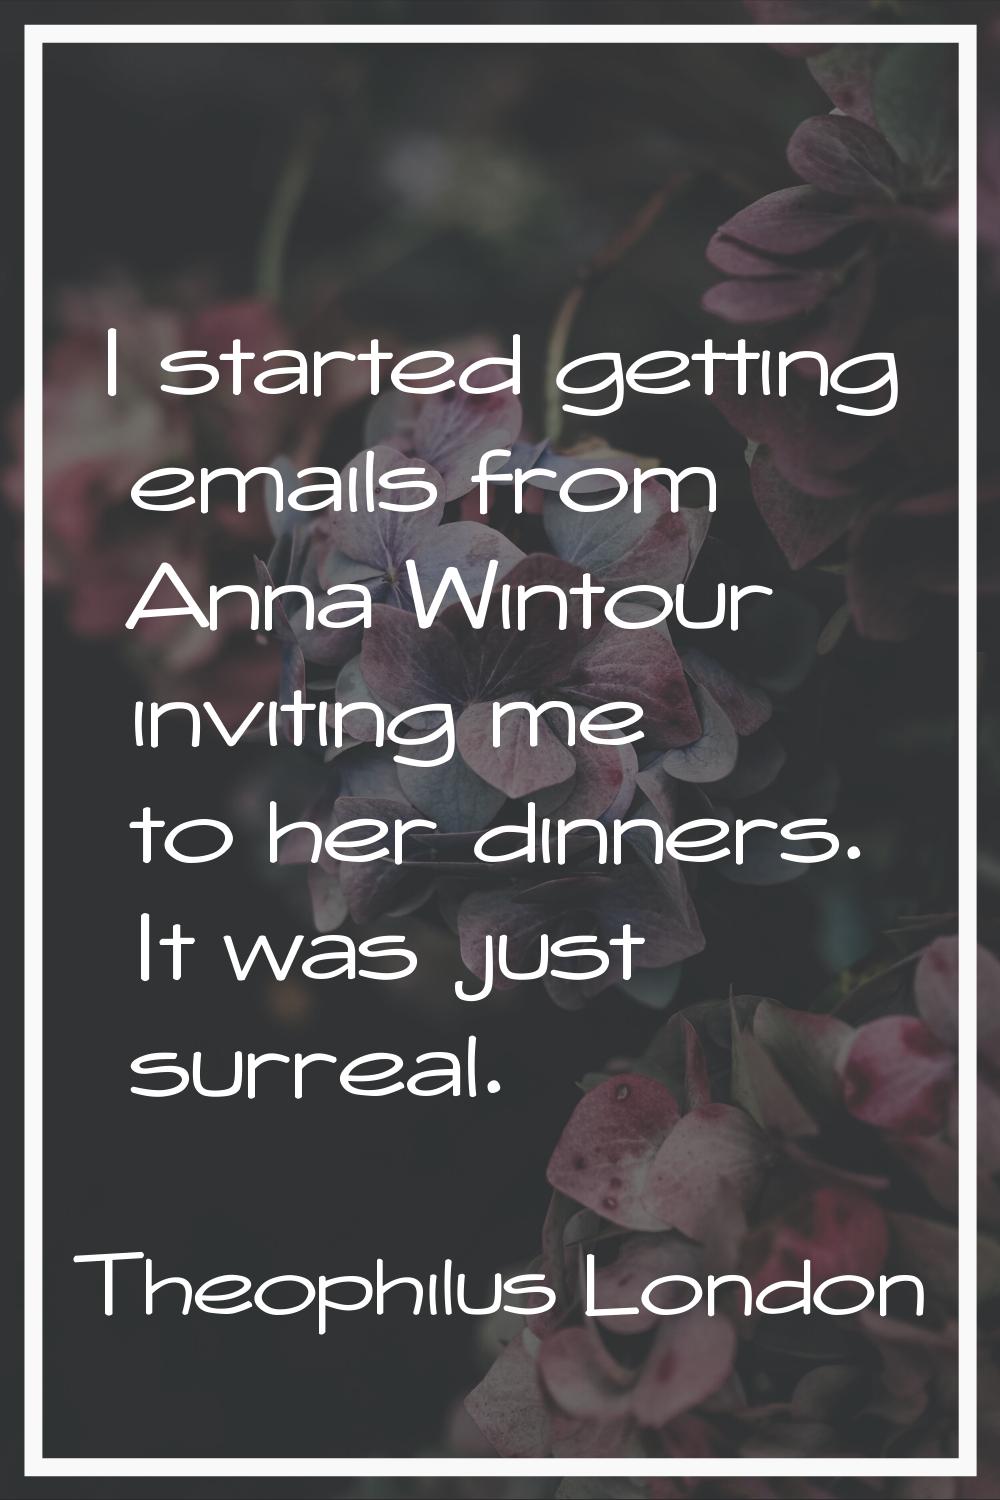 I started getting emails from Anna Wintour inviting me to her dinners. It was just surreal.